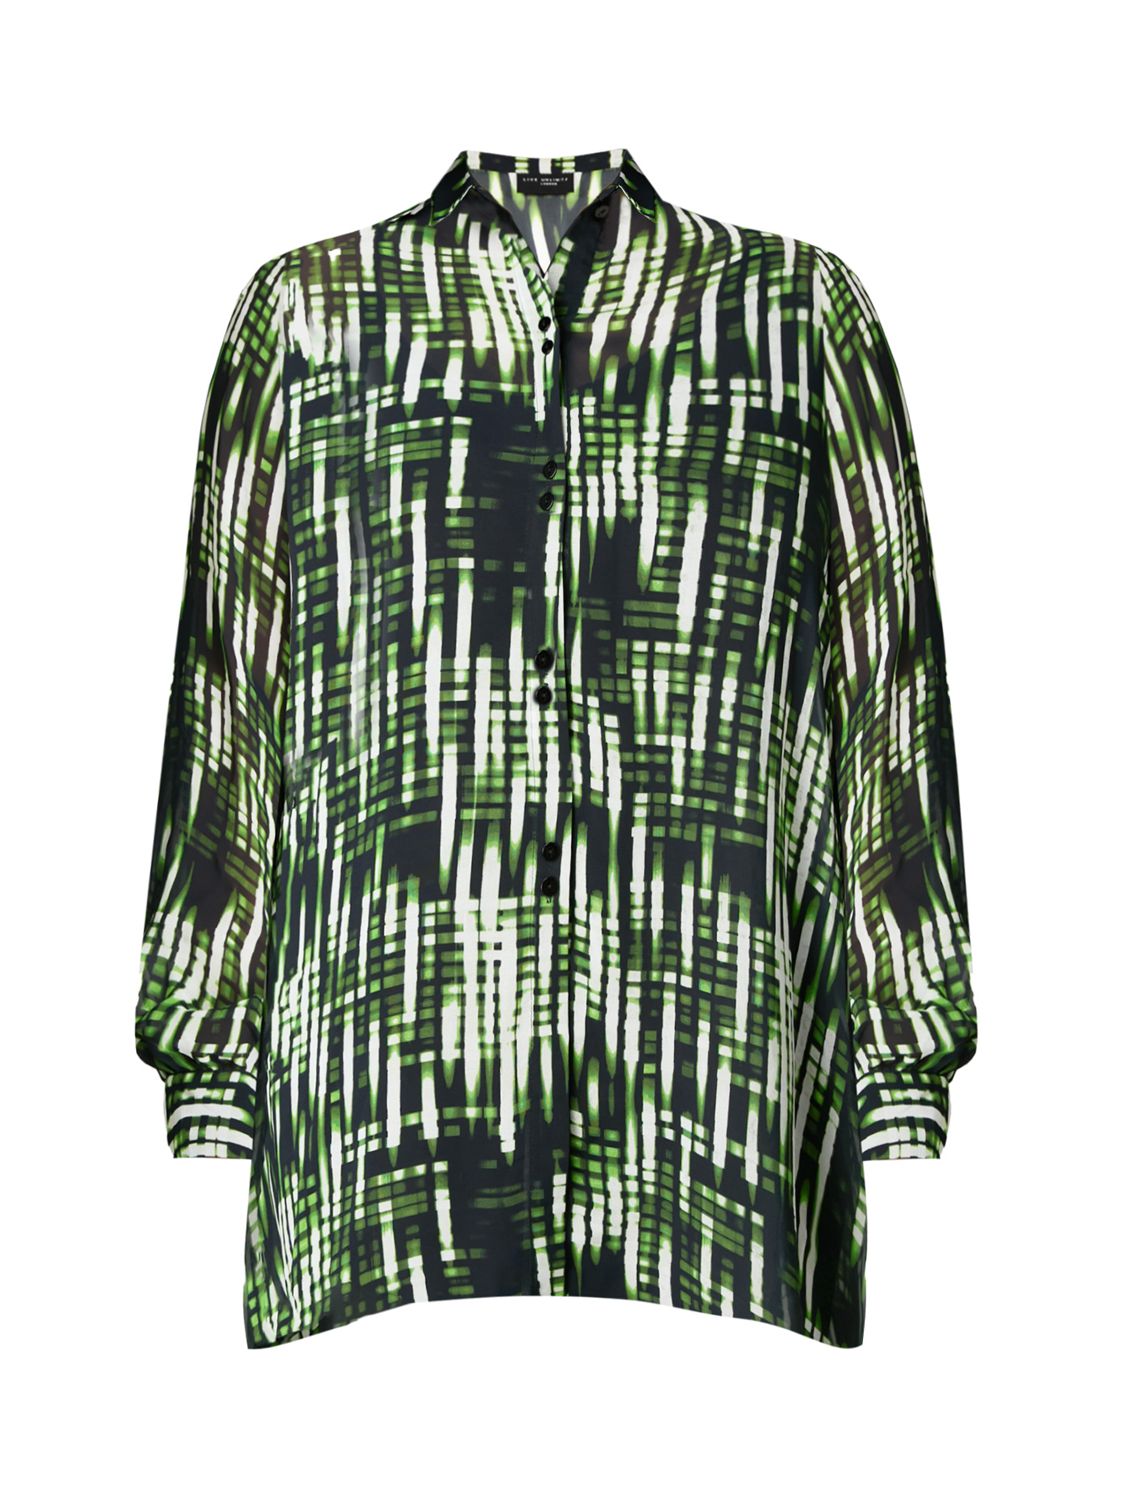 Buy Live Unlimited Curve Blurred Print Ruched Front Blouse, Green Online at johnlewis.com